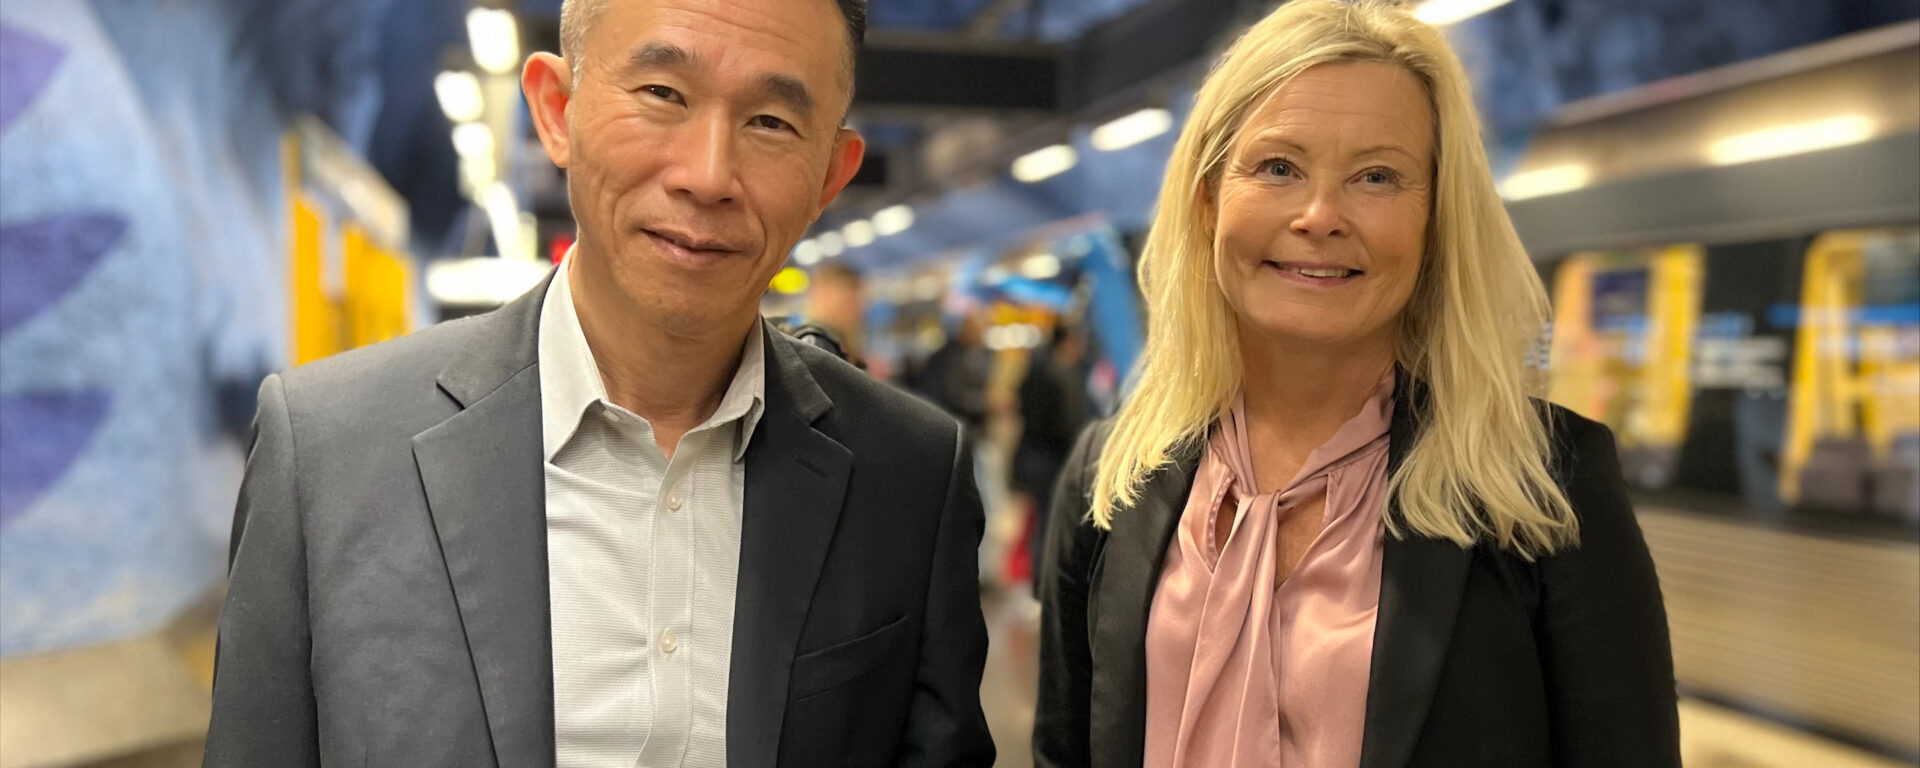 From left to right: Ling Wee Lee (Vice President of SMRT and Chairman of STRIDES Business International) and  Anna Höjer (CEO of Transdev Sweden)